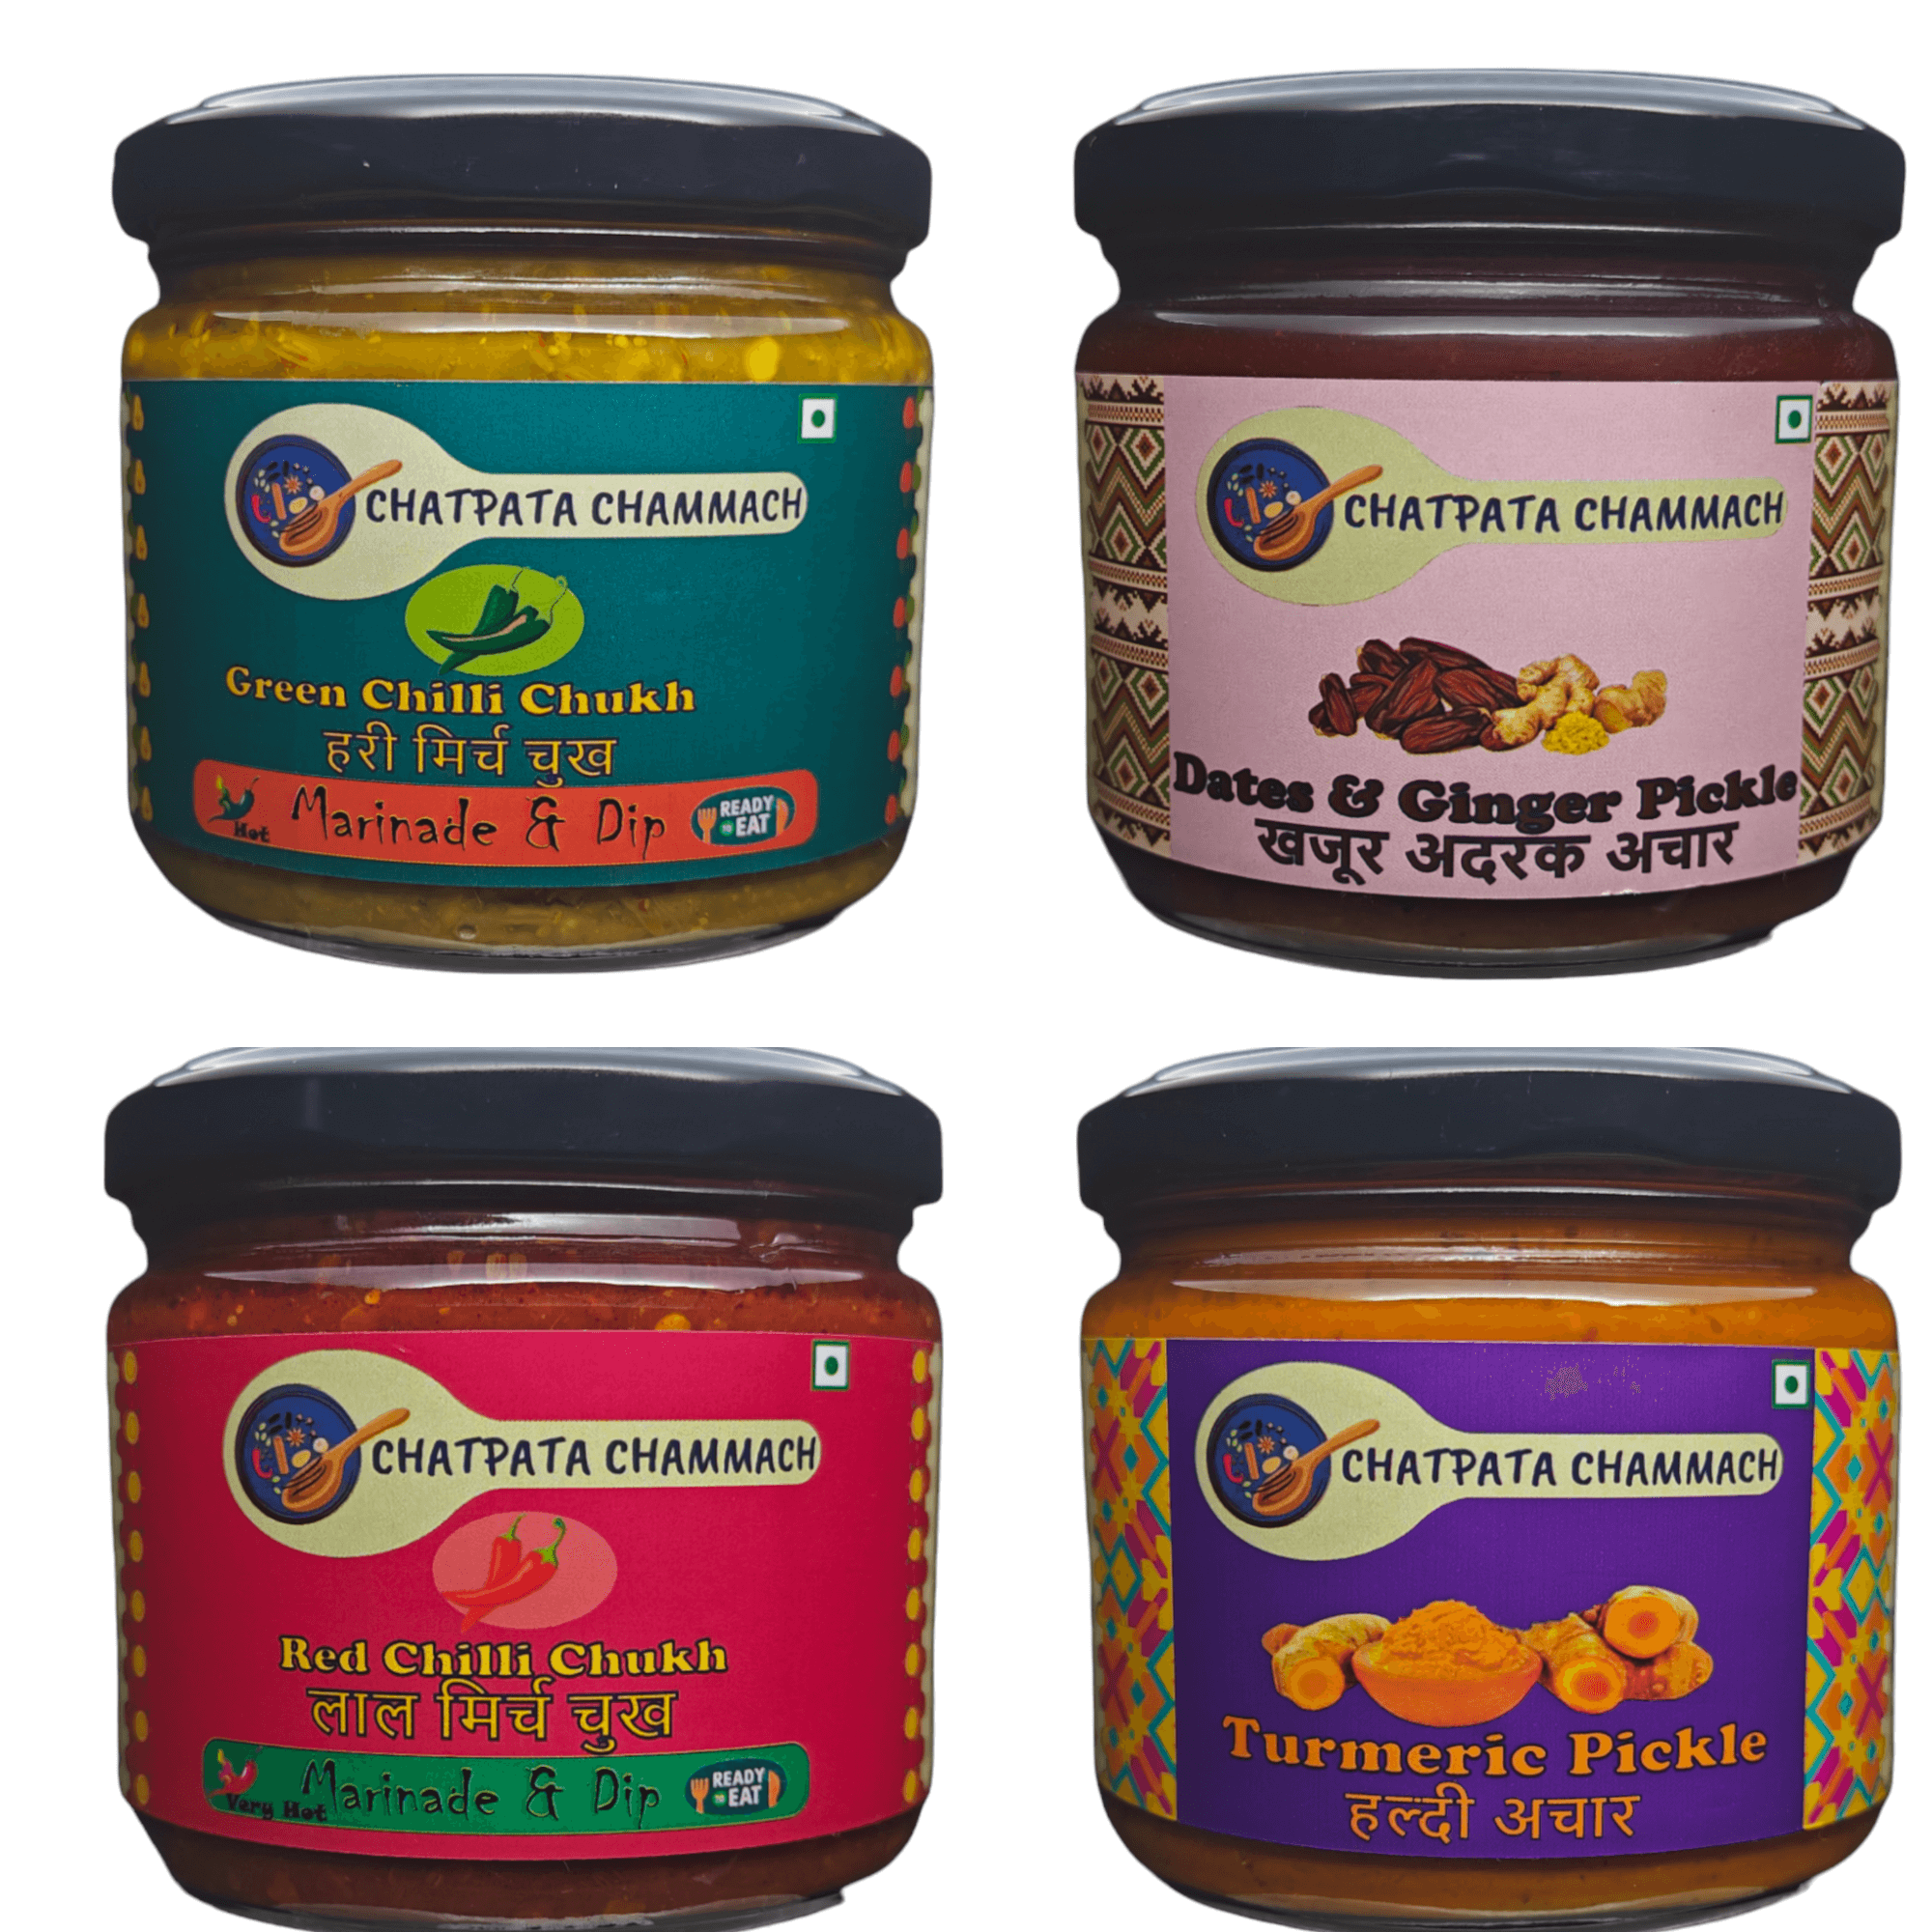 Hot & Sweet Combo (Pack of Dates Pickle, Turmeric Pickle, Red chilli chukh, Green chilli chukh)